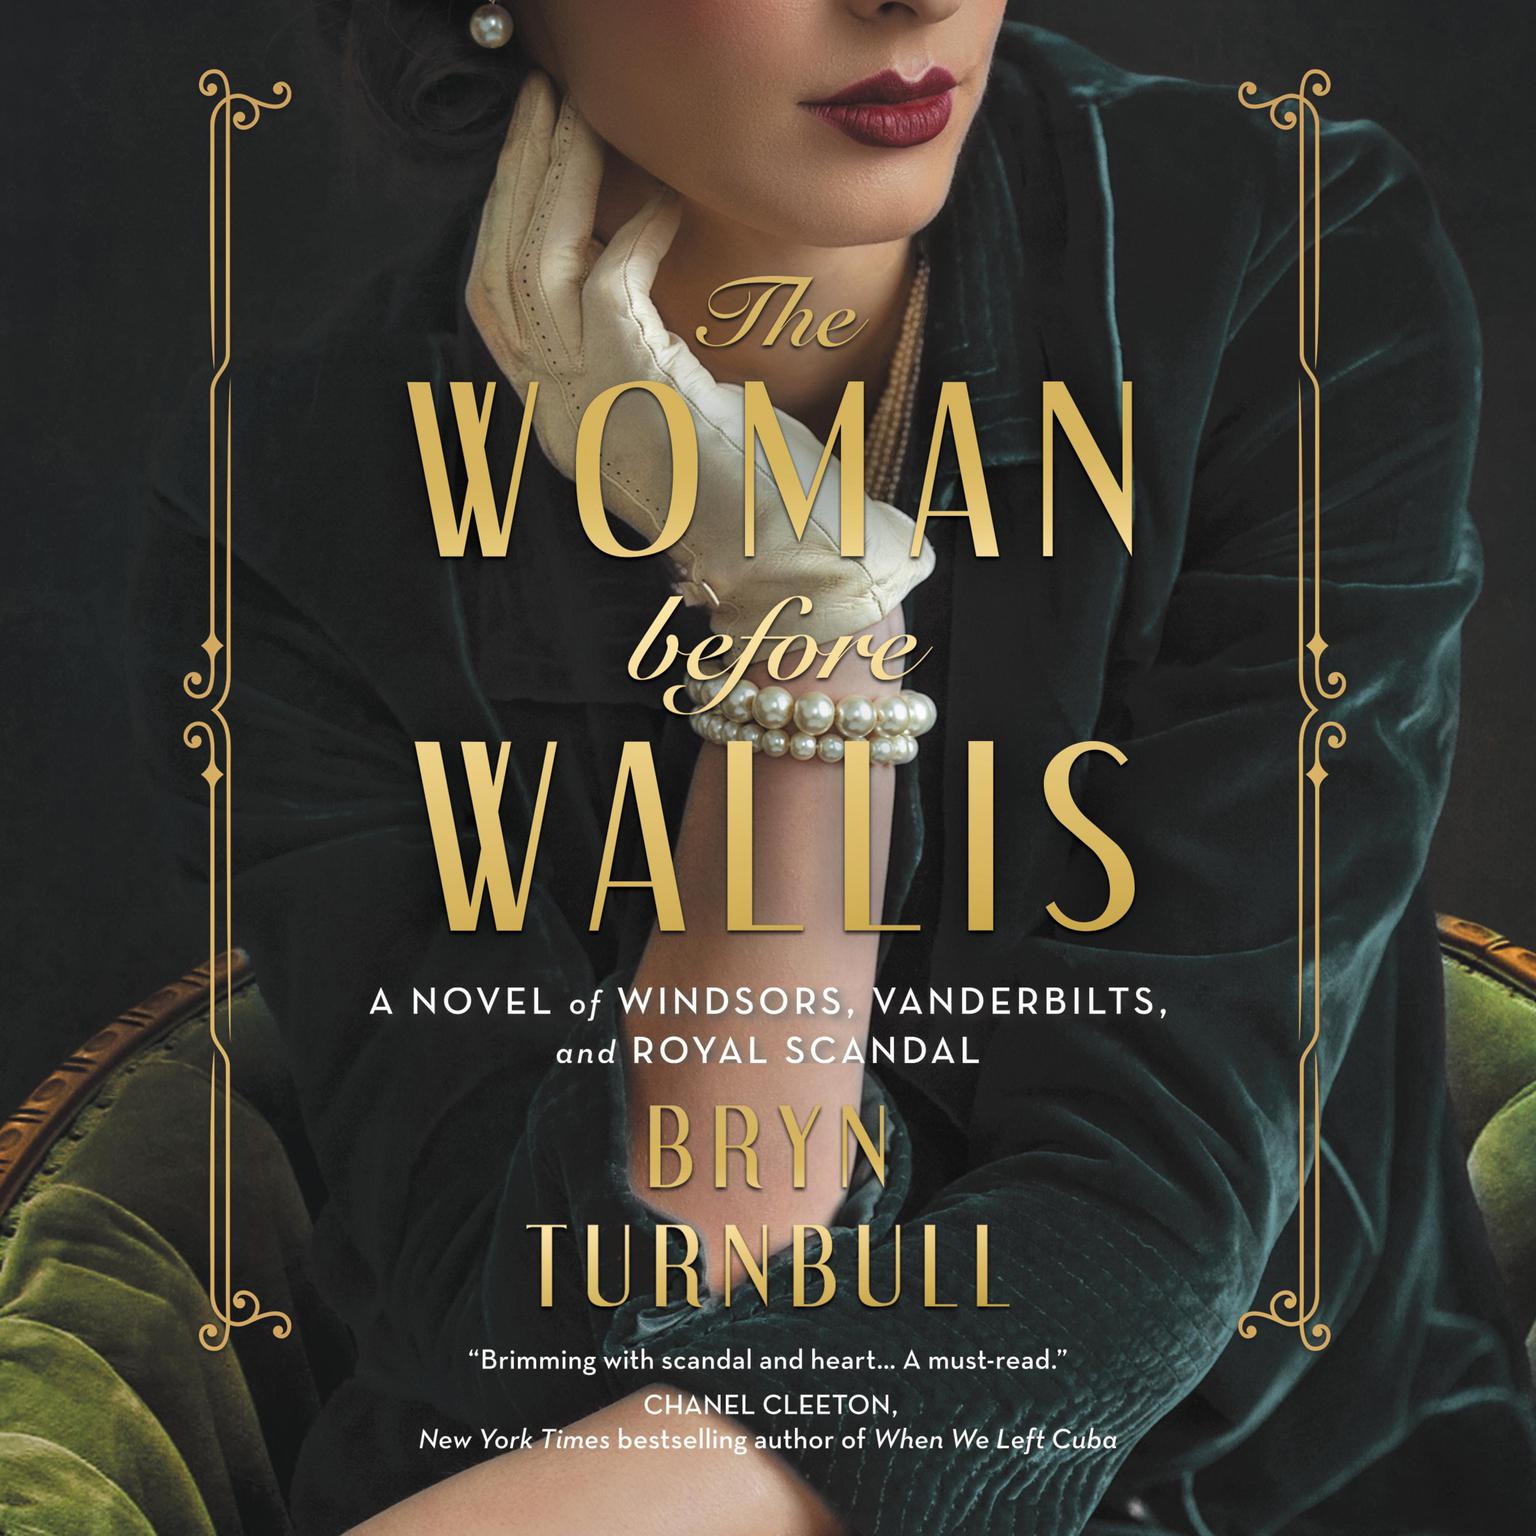 The Woman Before Wallis: A Novel of Windsors, Vanderbilts, and Royal Scandal Audiobook, by Bryn Turnbull